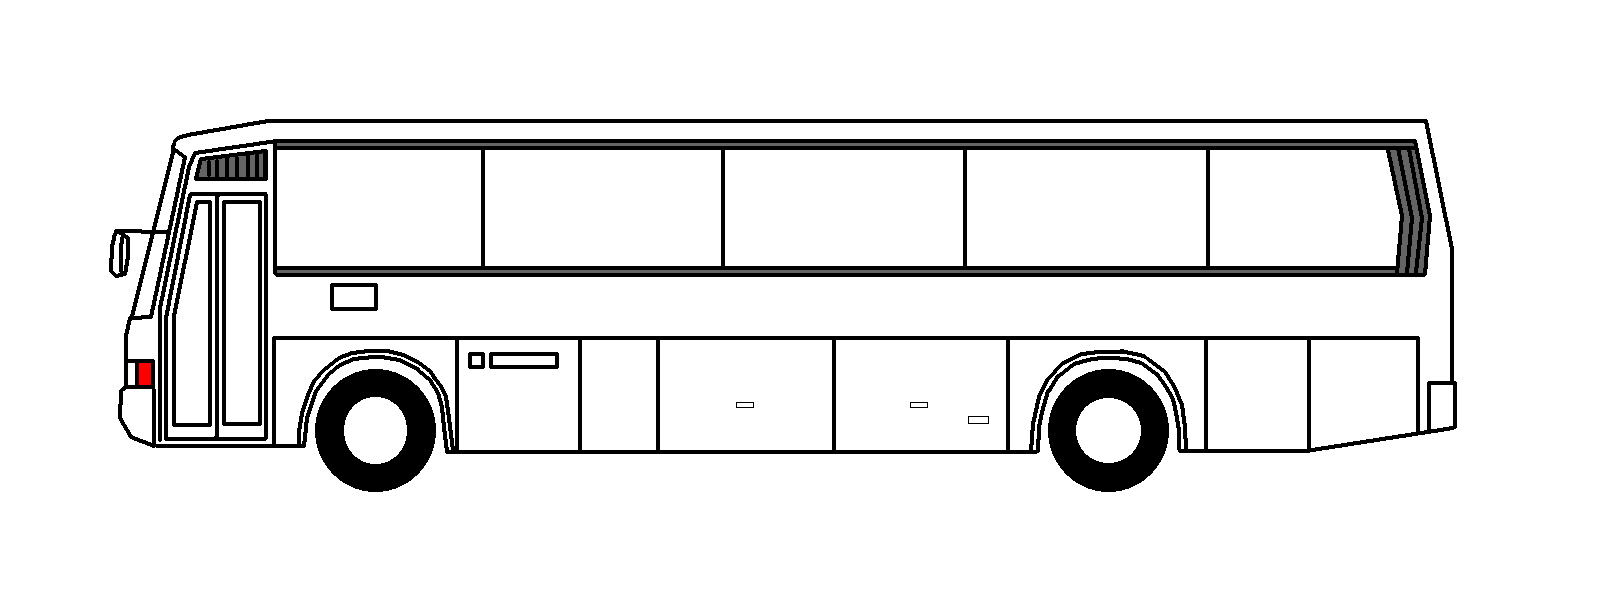 Bus black and white school bus side view clipart black and